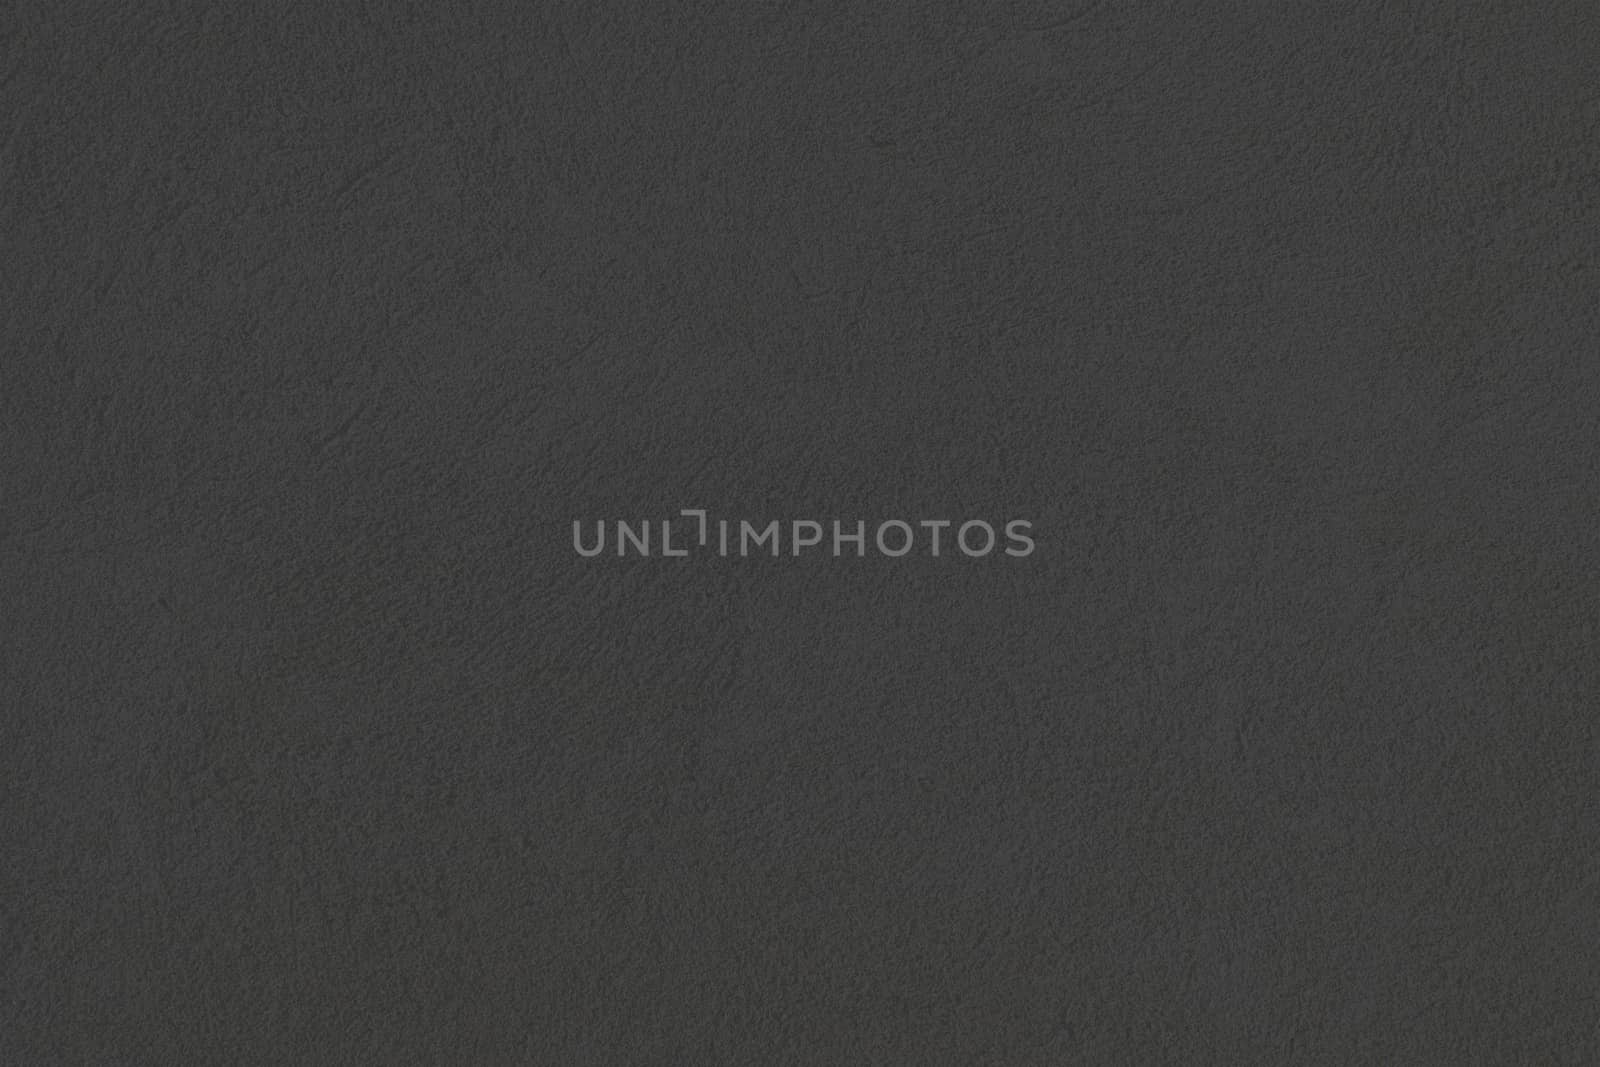 Black Raw Concrete Wall Texture Background. Suitable for Backdrop, Wallpaper and Decorative Design.